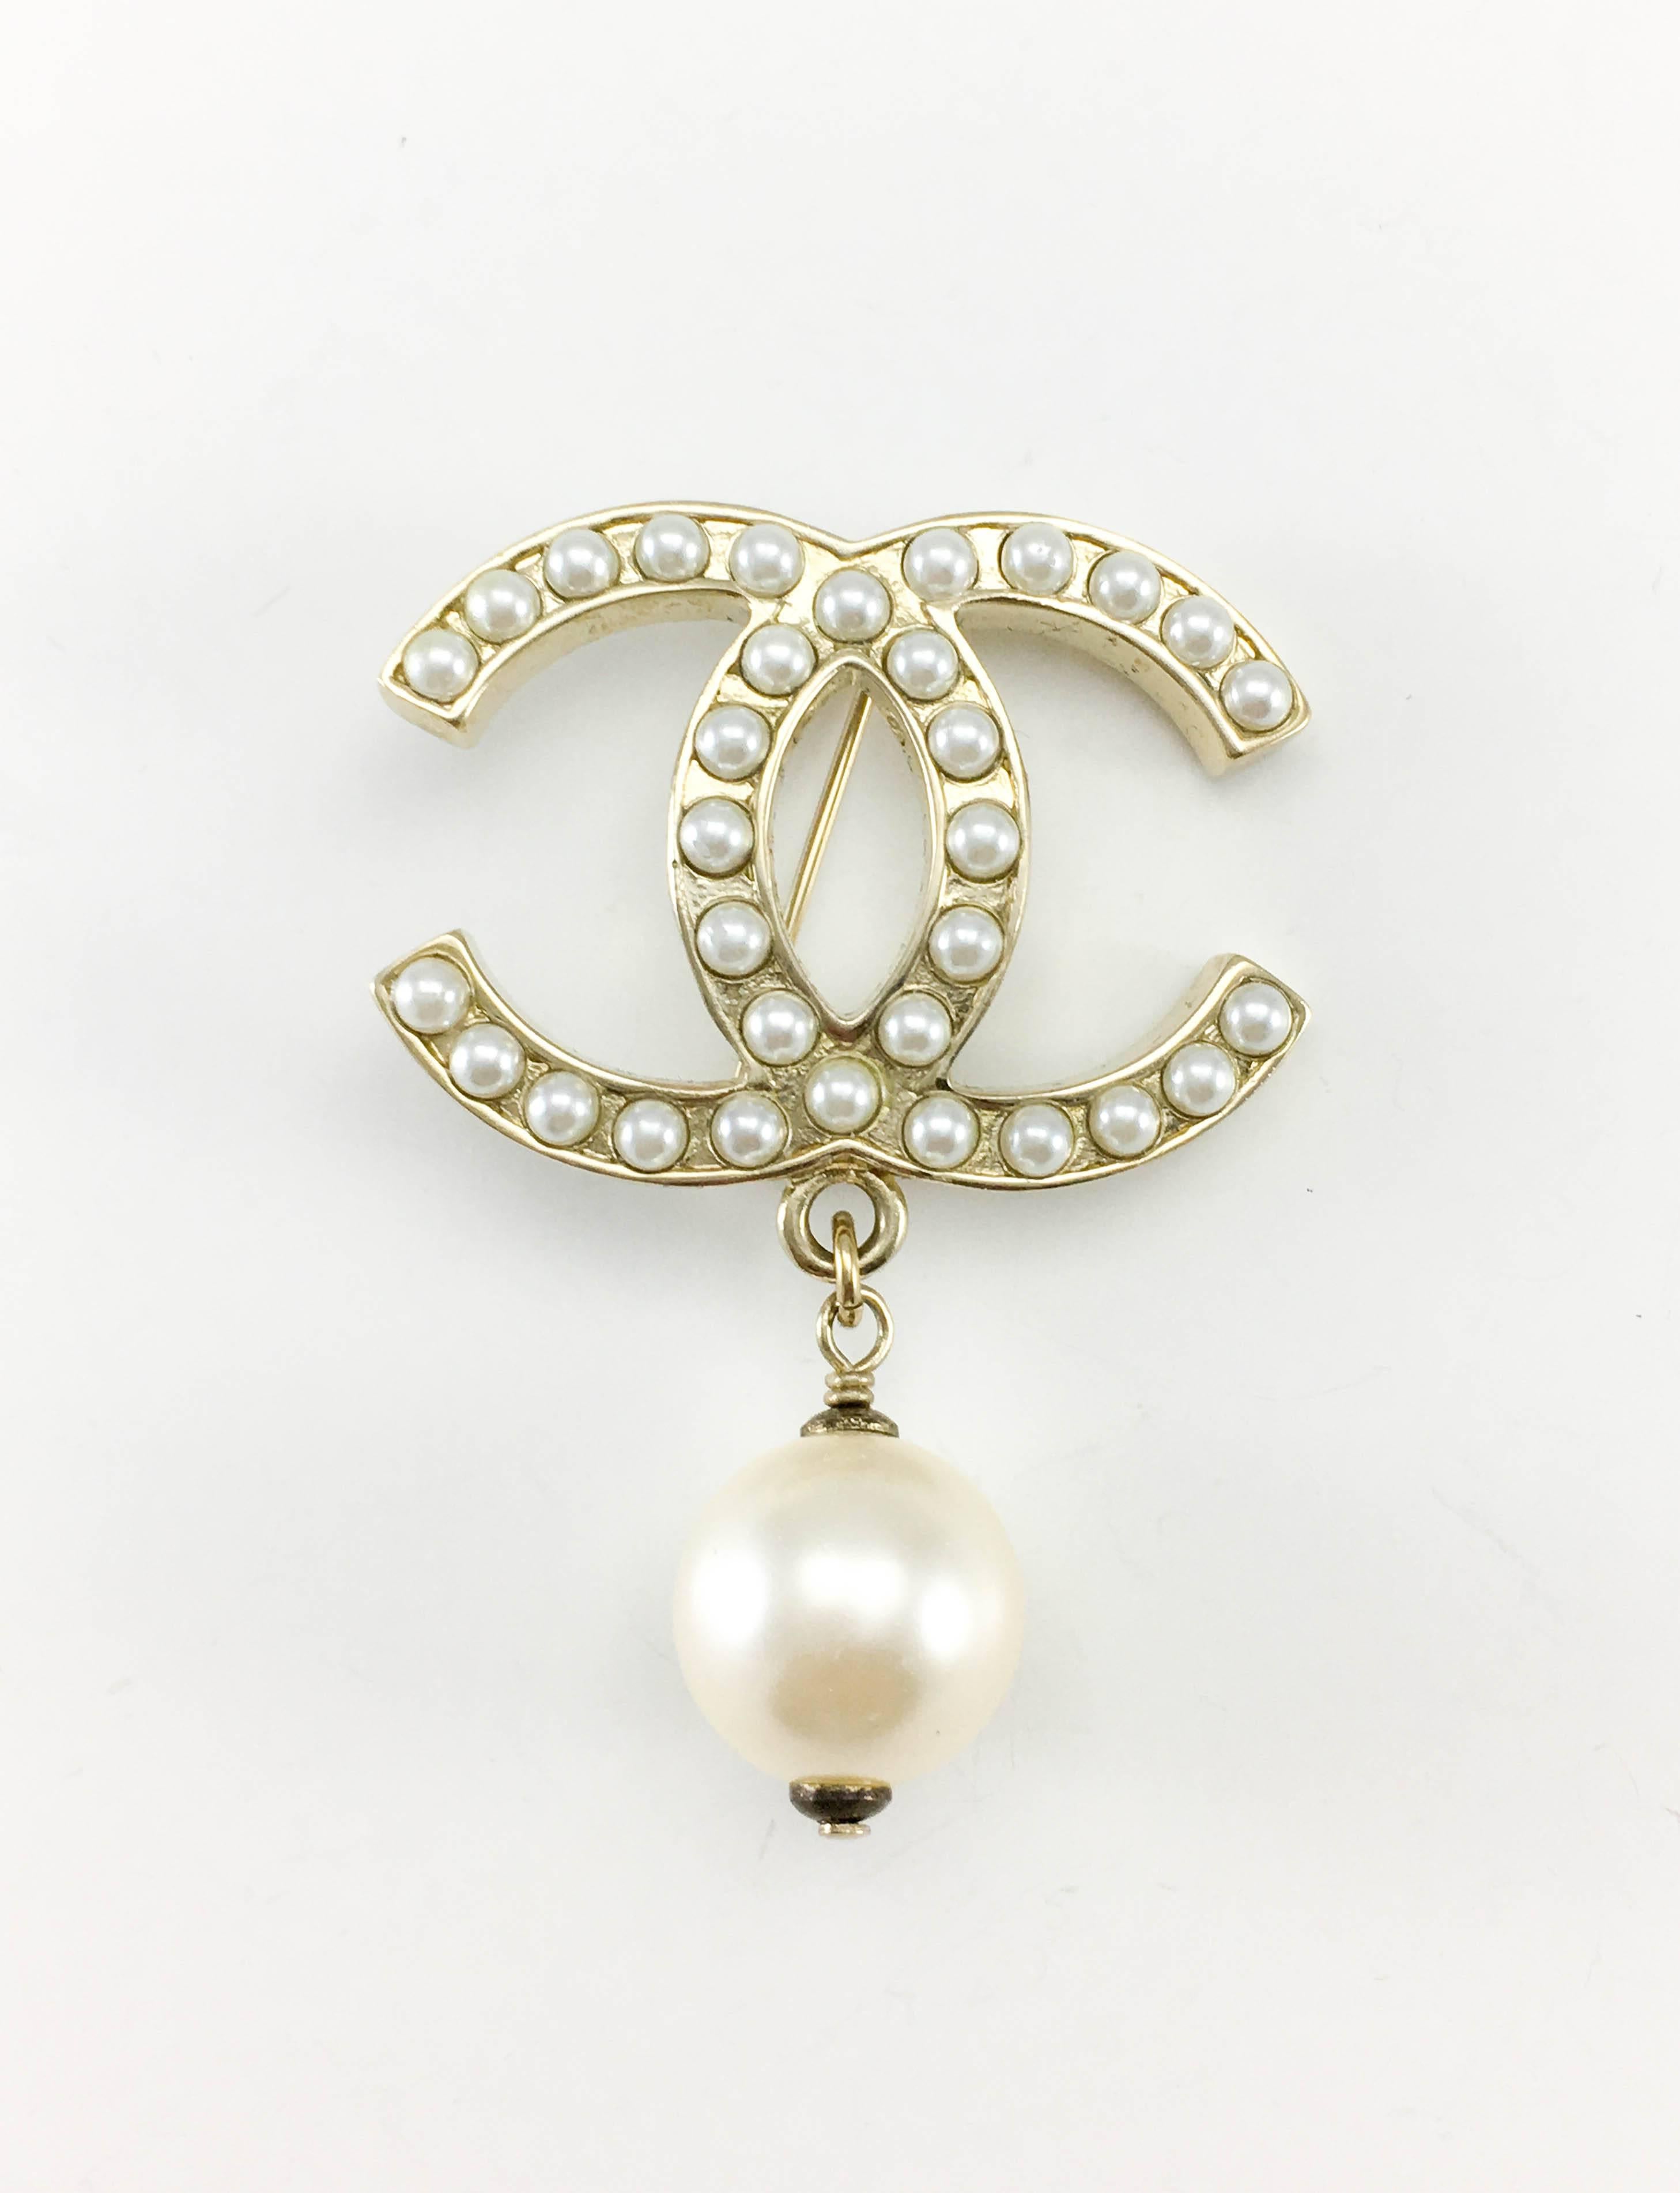 Chanel Pearl Logo Brooch. Dating from 2012, this brooch is quintessentially Chanel. Made in gilt metal, it has the iconic ‘CC’ logo adorned with faux cabochon pearls with a larger faux pearl drop. Chanel signed on the back. An instant dash of